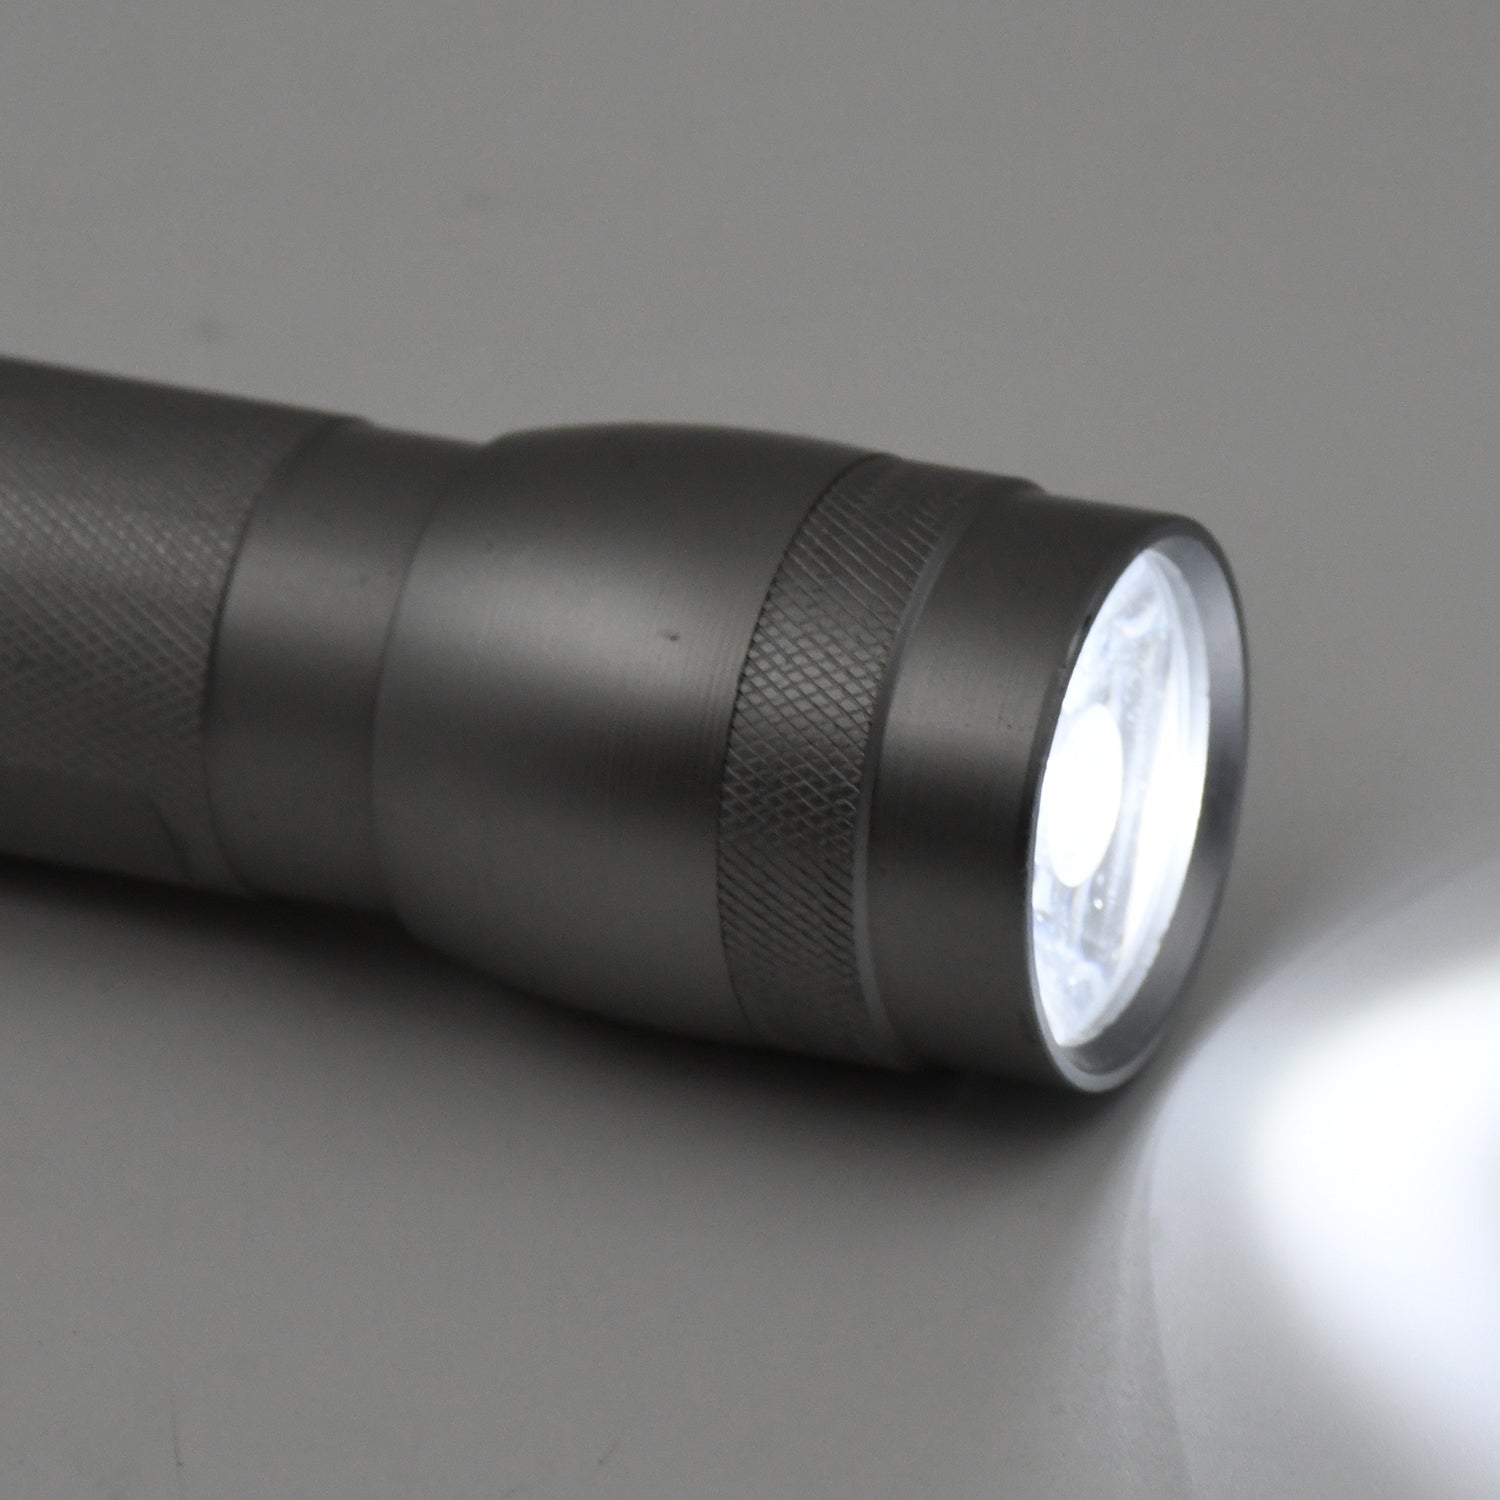 Portable Mini Torch / Flashlight 9 LED Powerful High Lumens Pen Light Easy To Carry, Portable Pocket Compact Torch for Emergency 3 Battery operated (Battery not included / 1 pc)